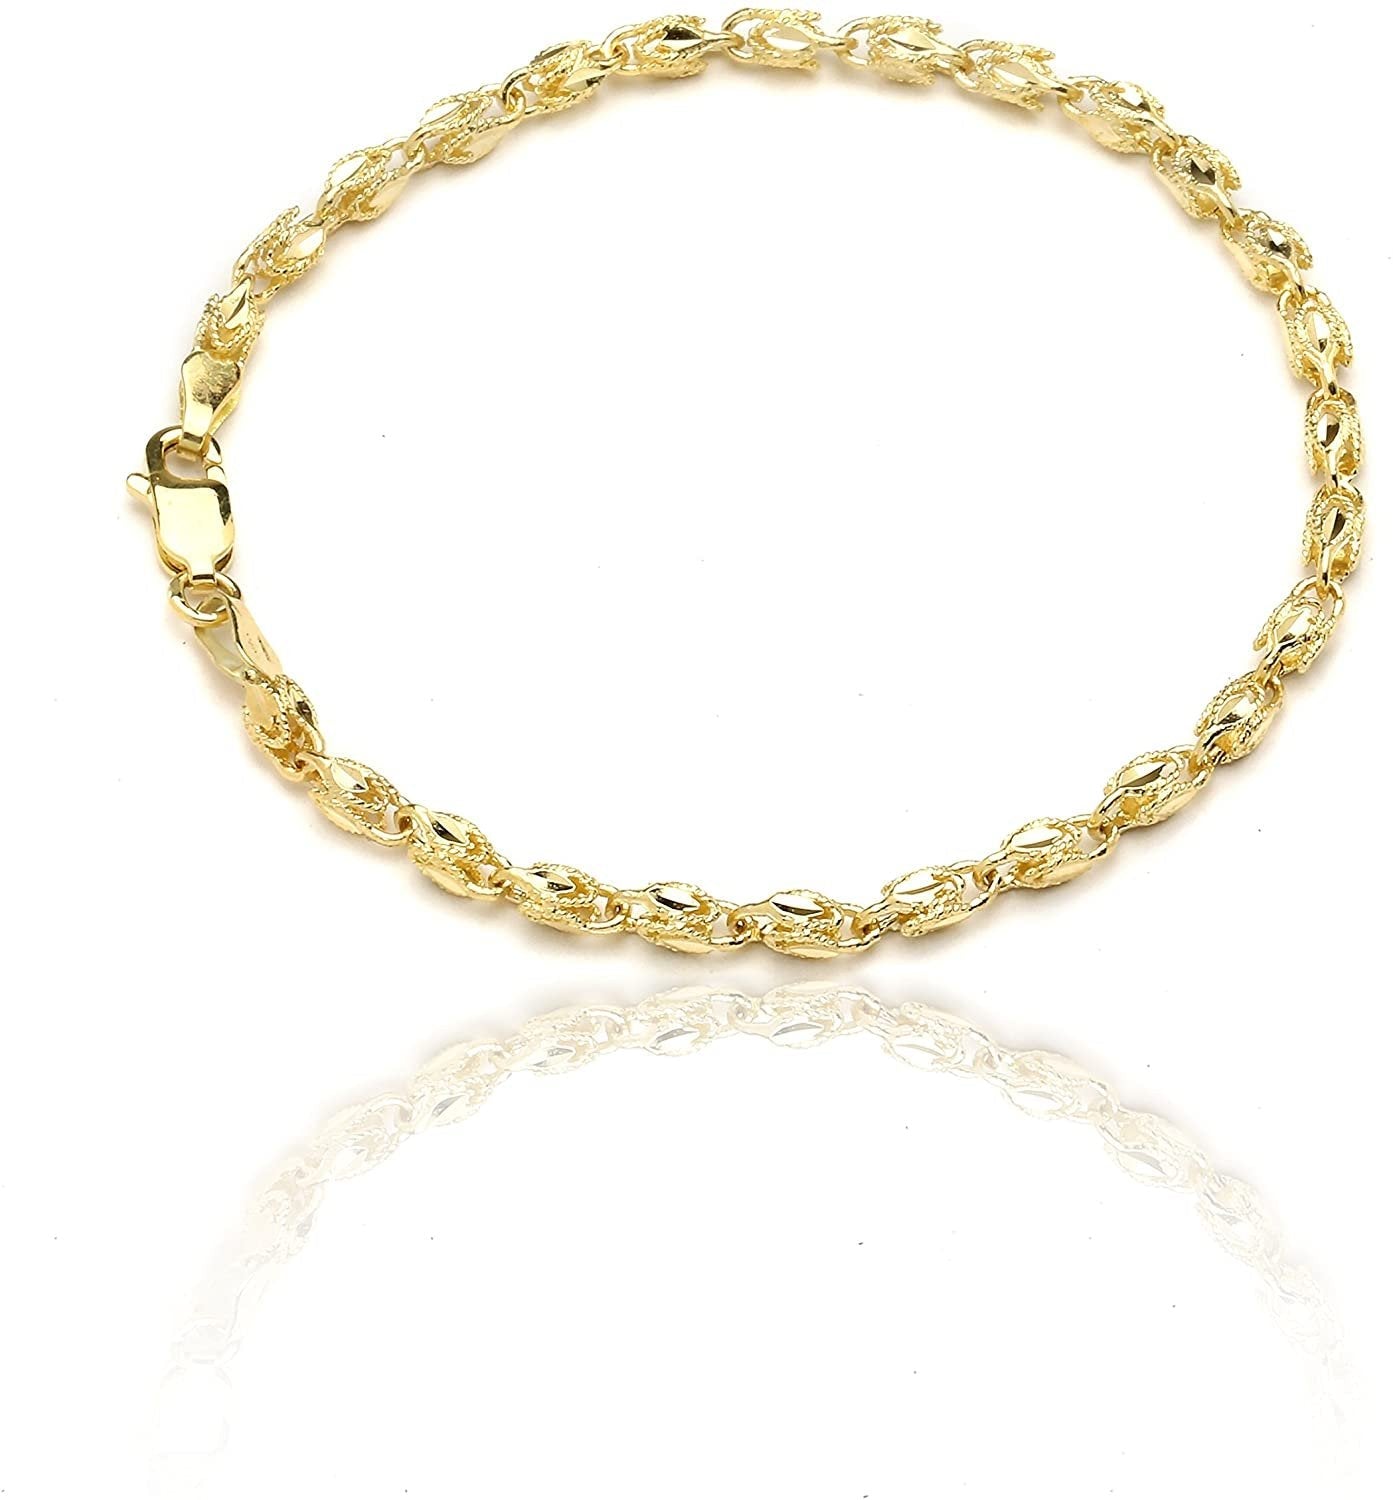 10k Yellow Gold 2.5mm Turkish Rope Chain Bracelet and Anklet